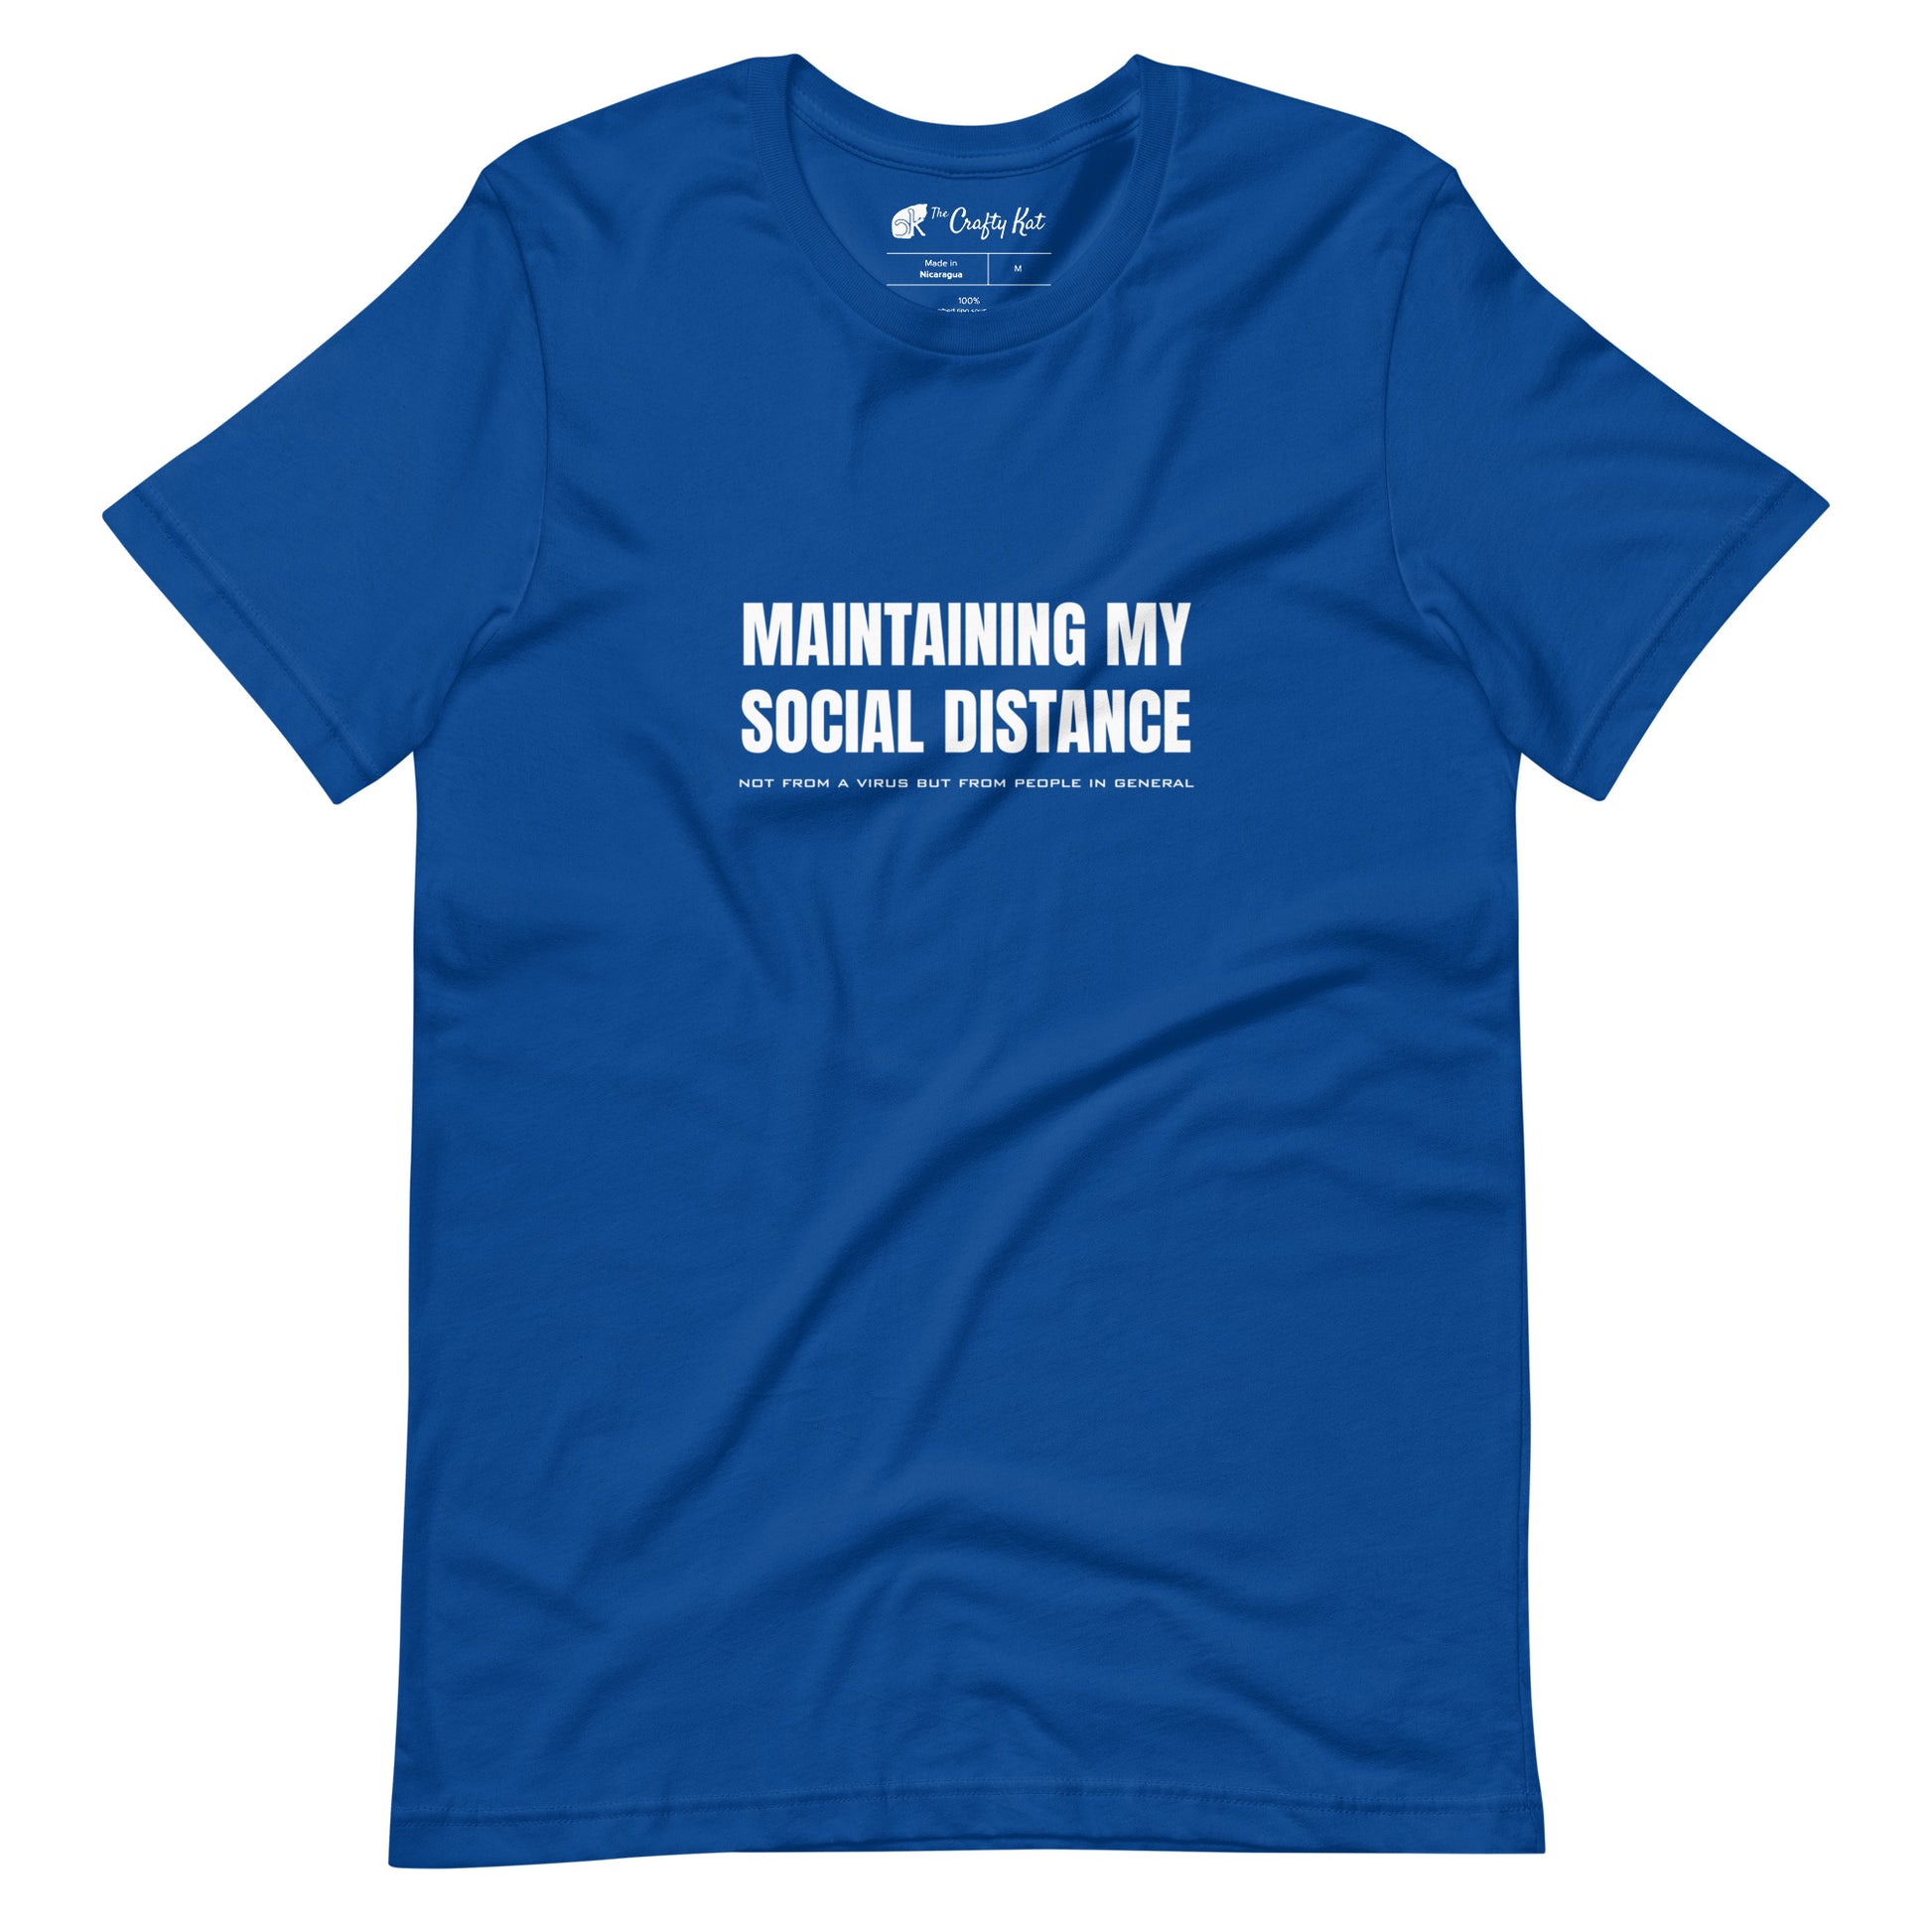 True Royal blue t-shirt with white graphic: "MAINTAINING MY SOCIAL DISTANCE not from a virus but from people in general"